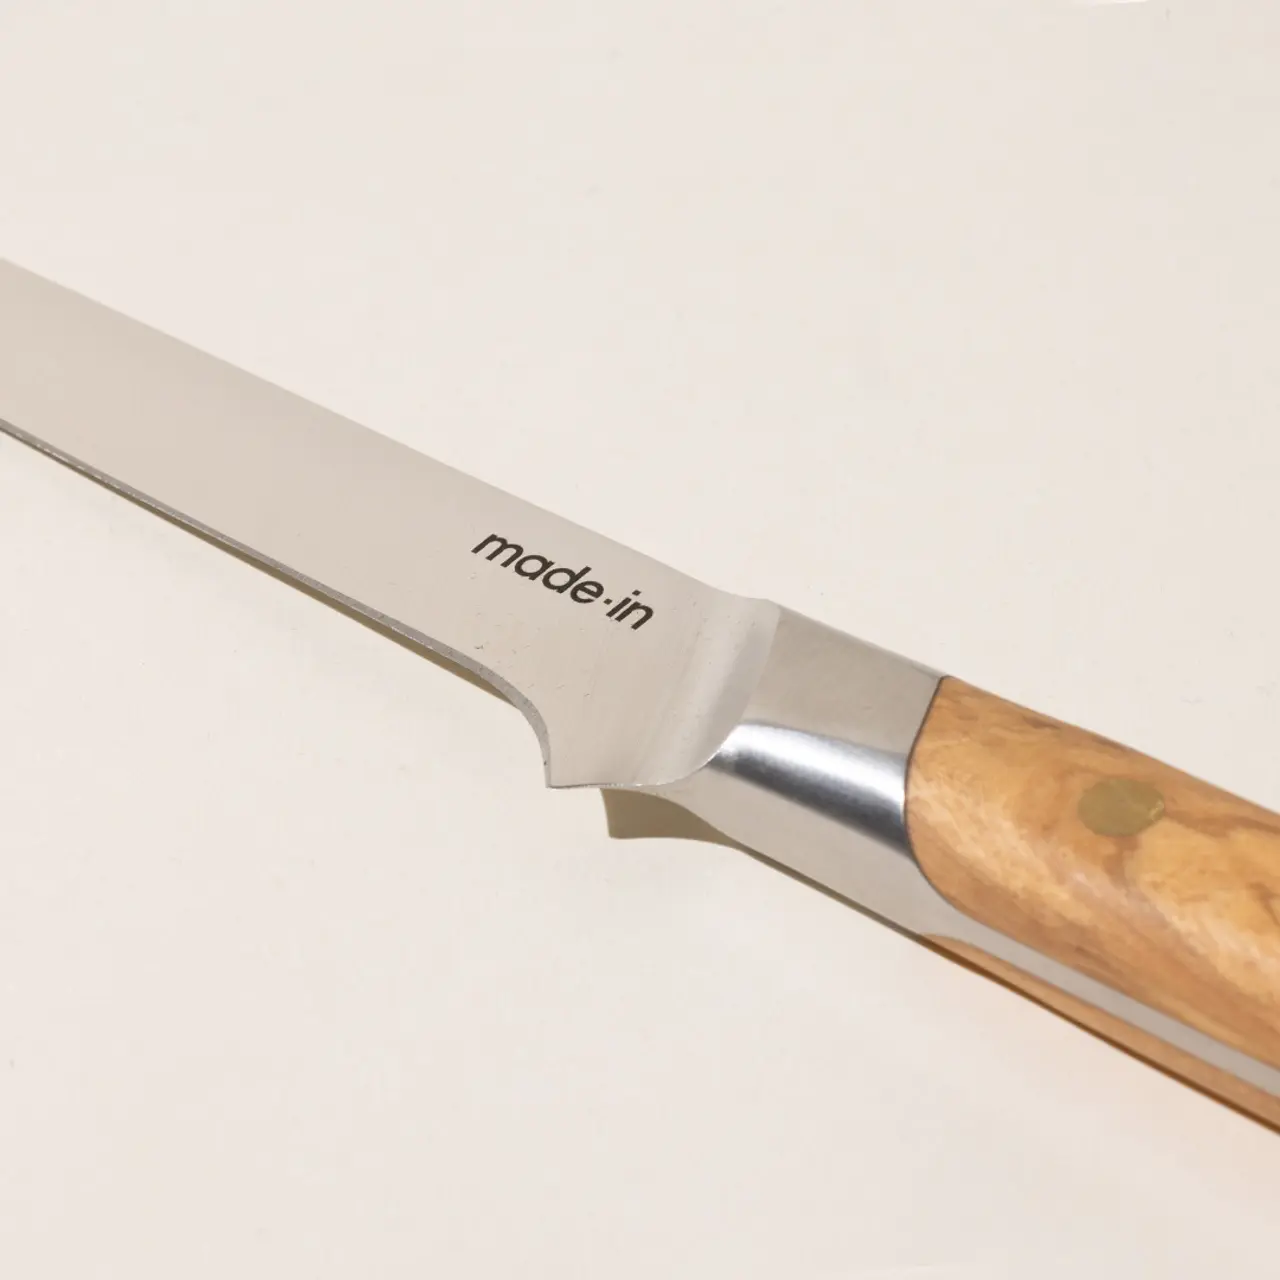 A close-up view of a kitchen knife with a wooden handle and the words "made-in" printed on the blade.